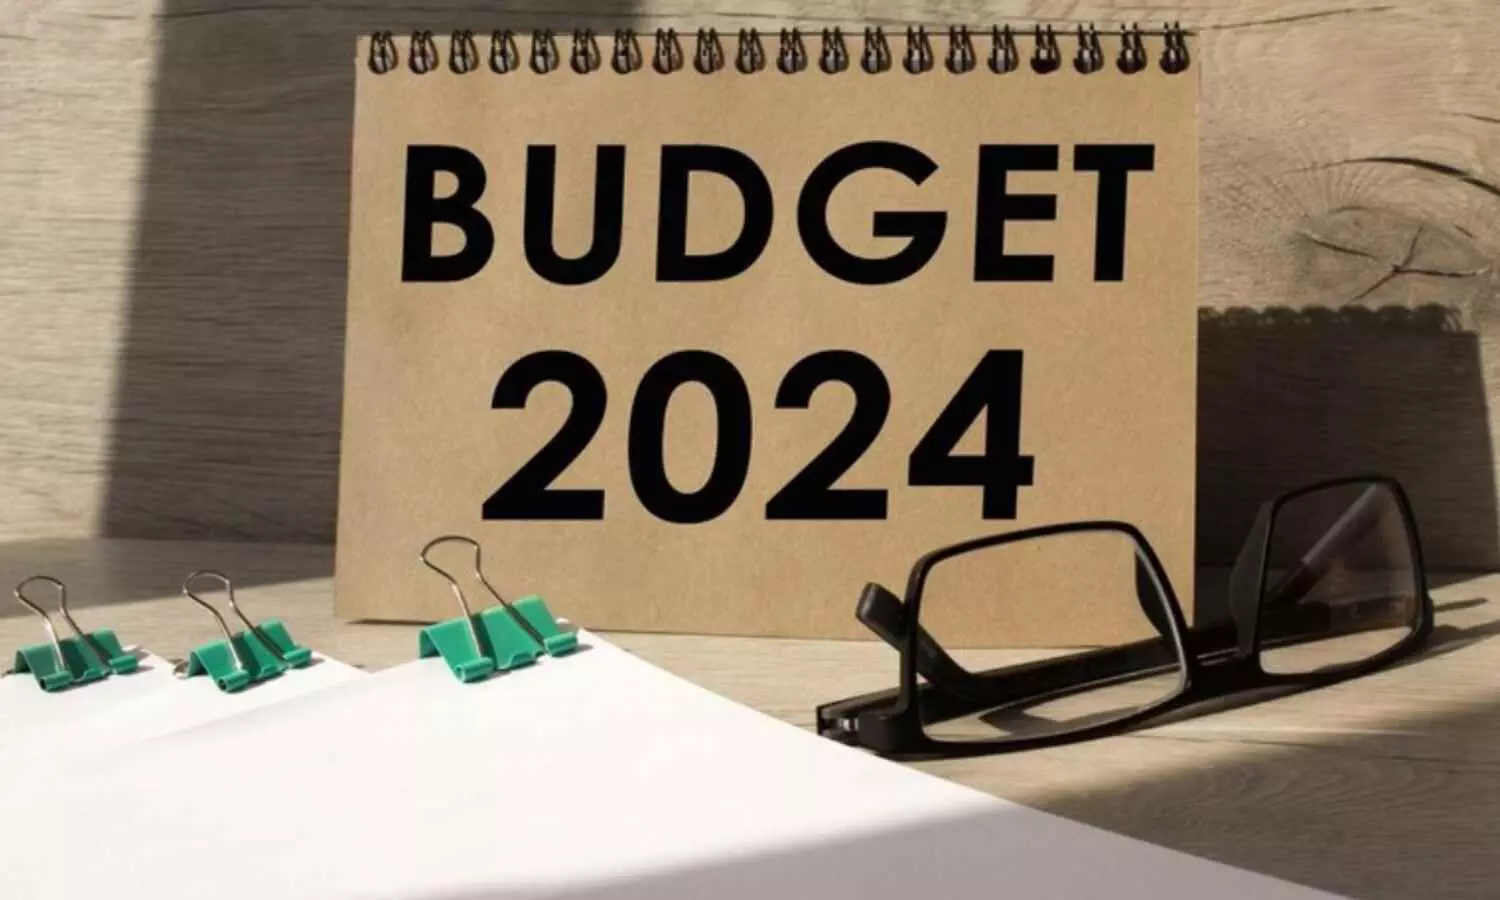 Union Budget 2024 Date and Time Revealed: Your FAQs Answered